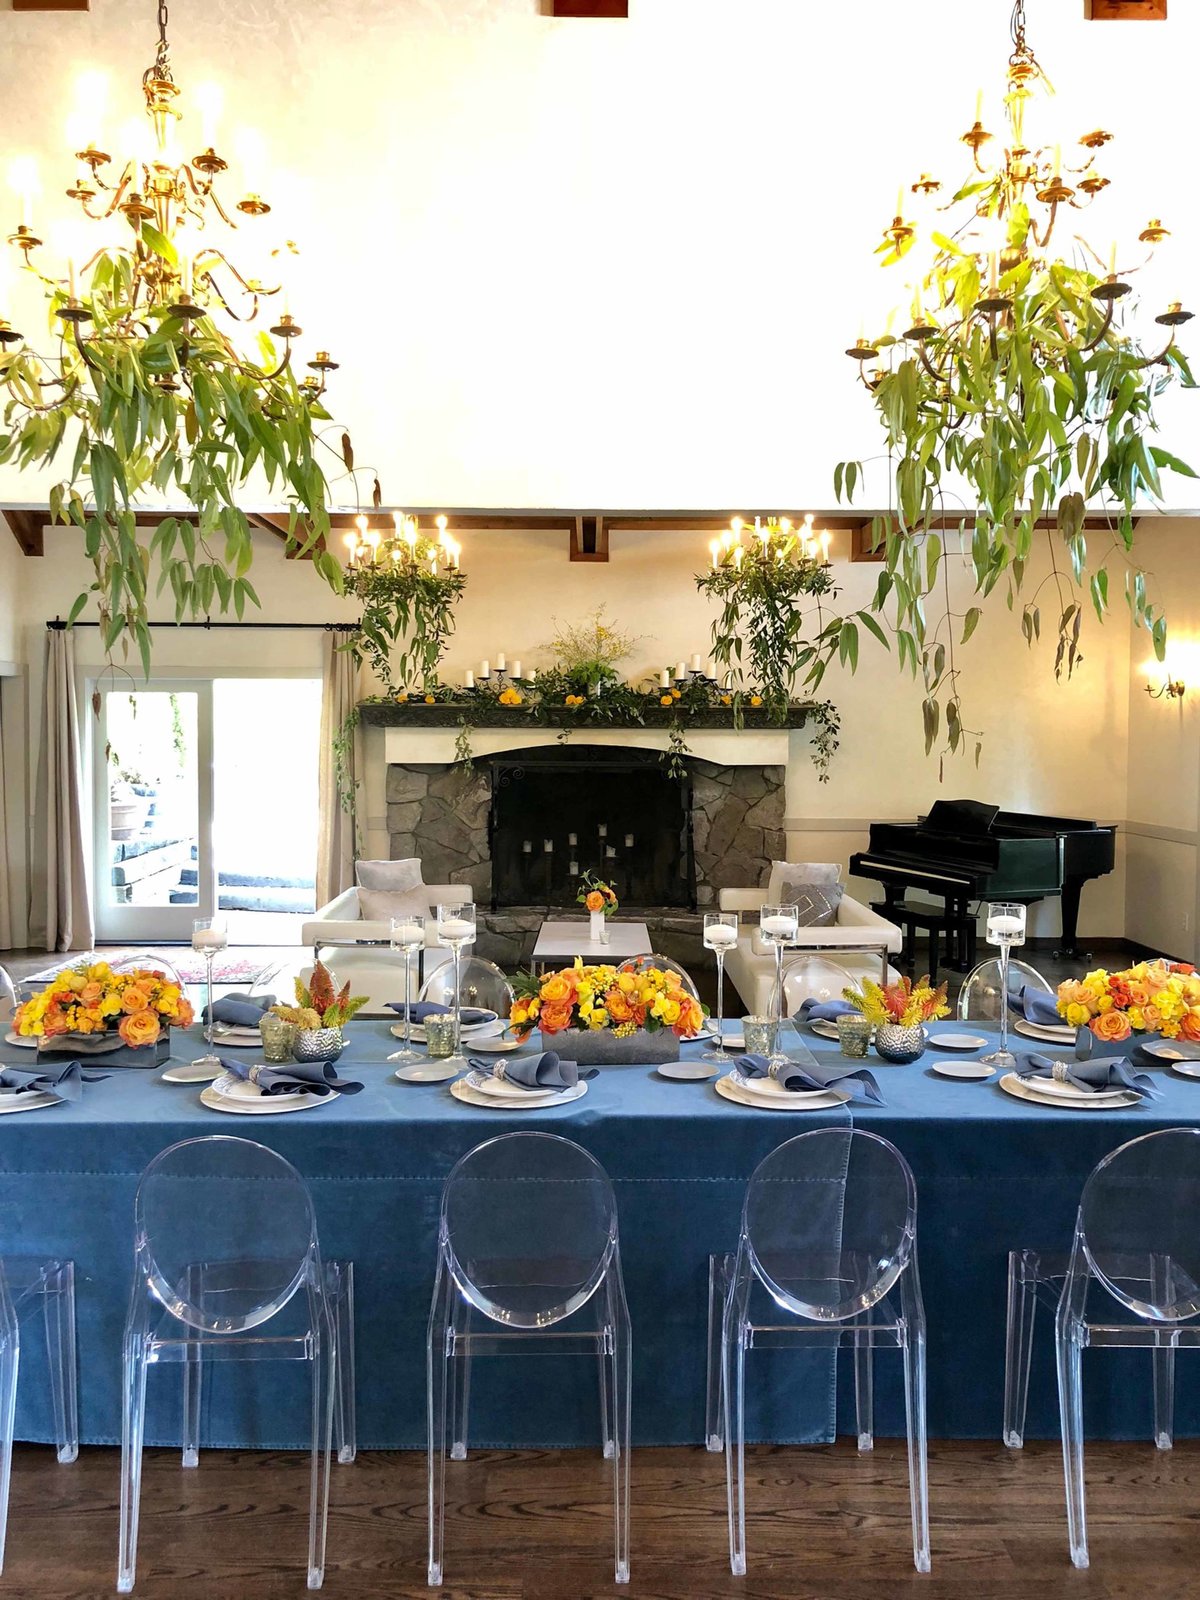 company dinner with orange centerpieces, blue linens, floating candles, clear lucite ghost chairs and greenery chandeliers